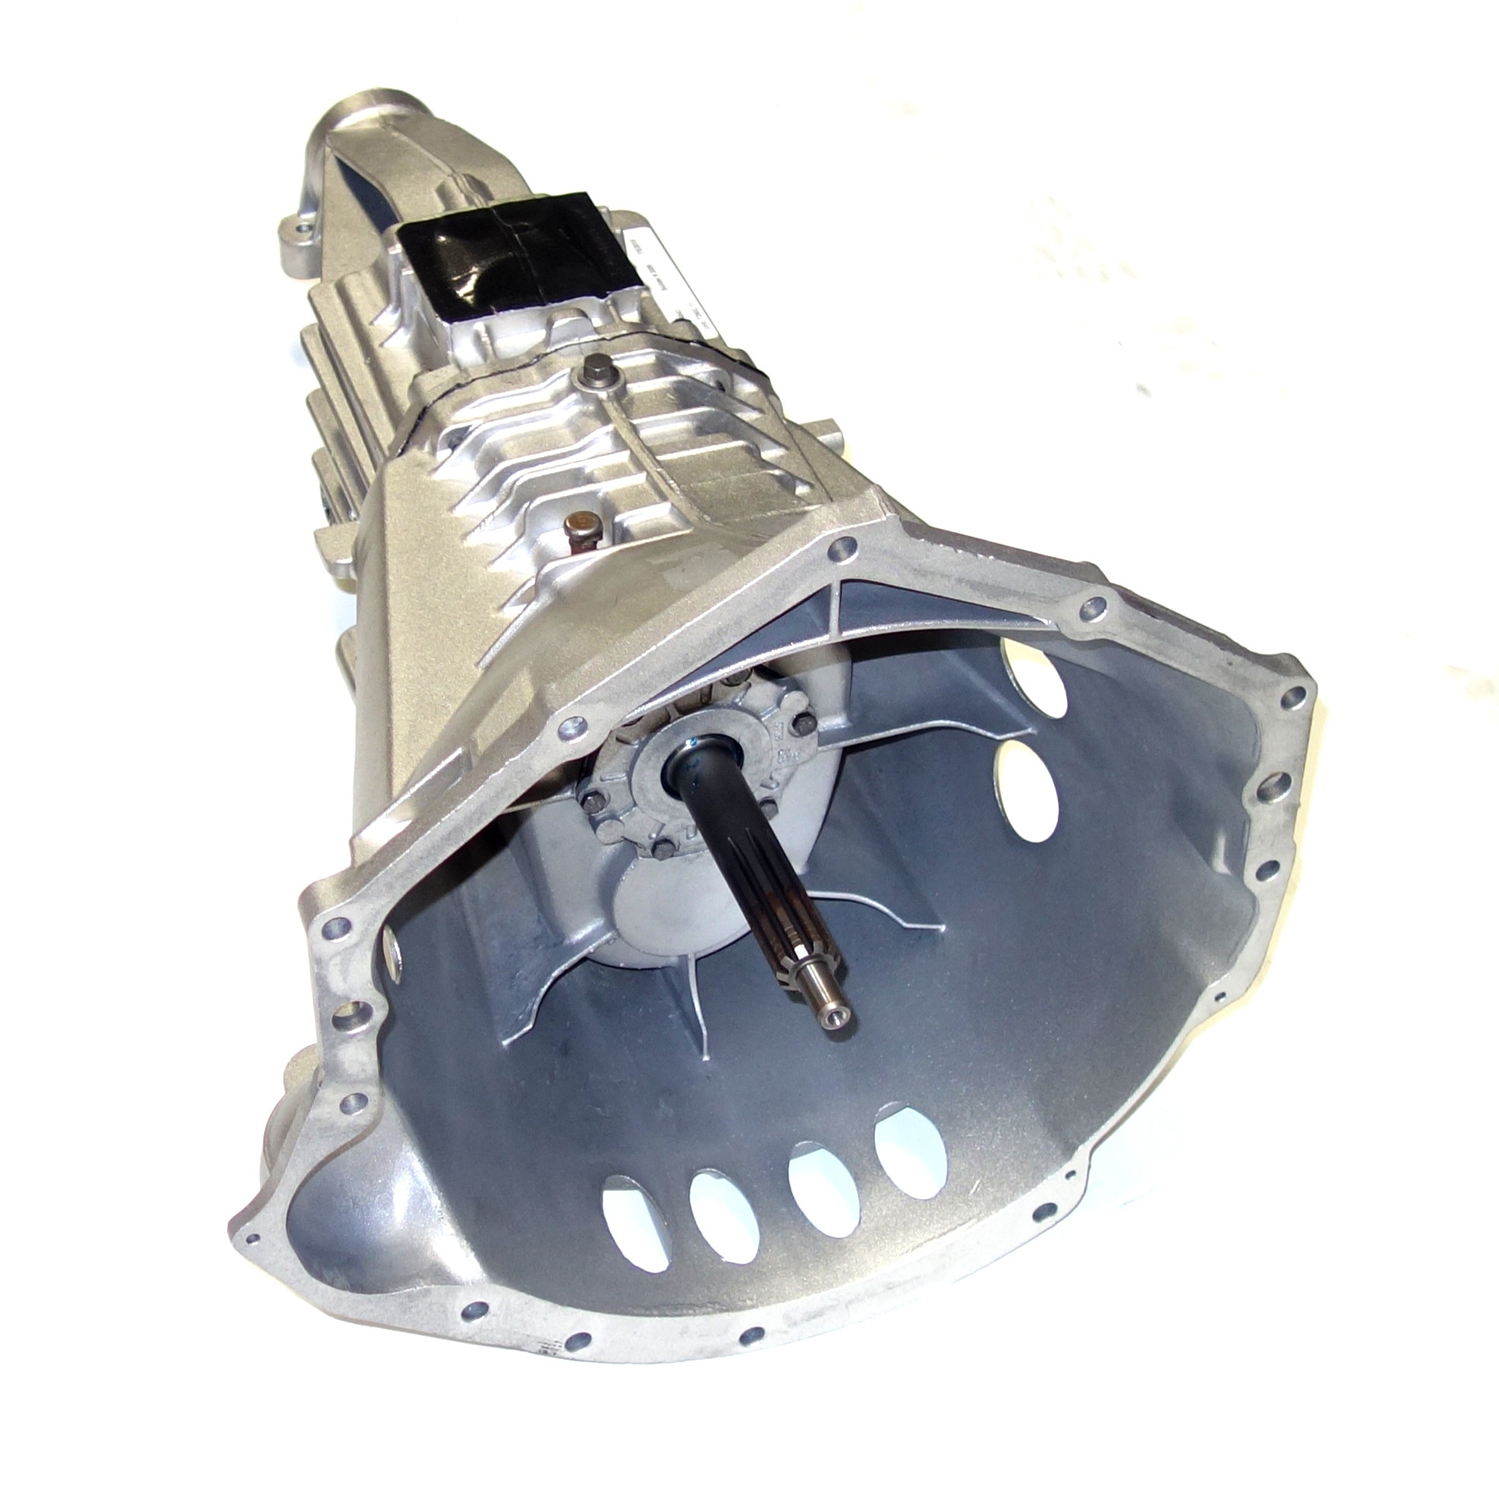 Remanufactured HM290 Manual Transmission for GM 99-07 Silverado & Sierra 1500, 2WD, 5 Speed